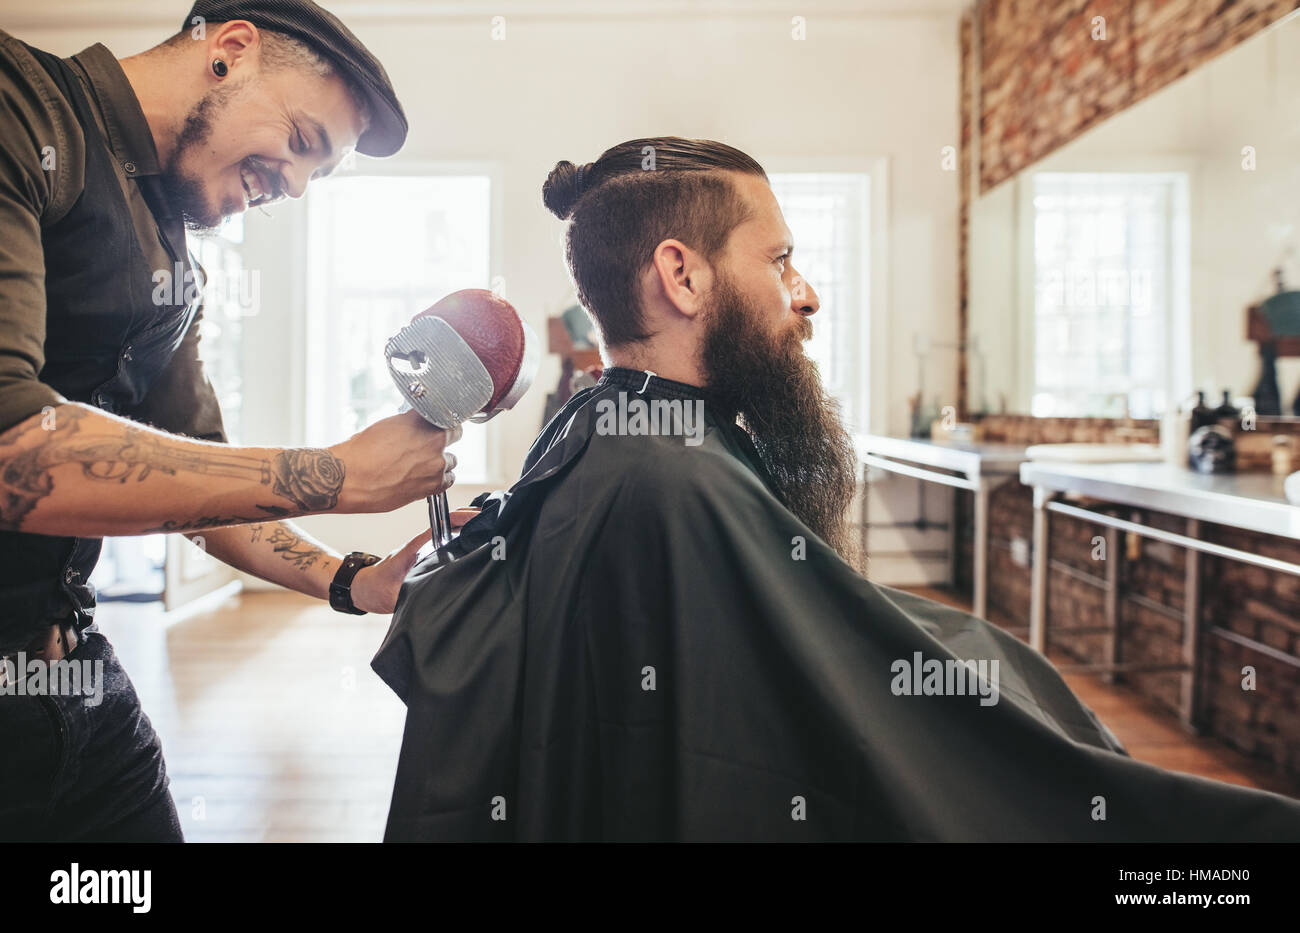 Handsome bearded man in a salon cape in the barbershop, with hairdresser adjusting the headrest of the chair. Stock Photo